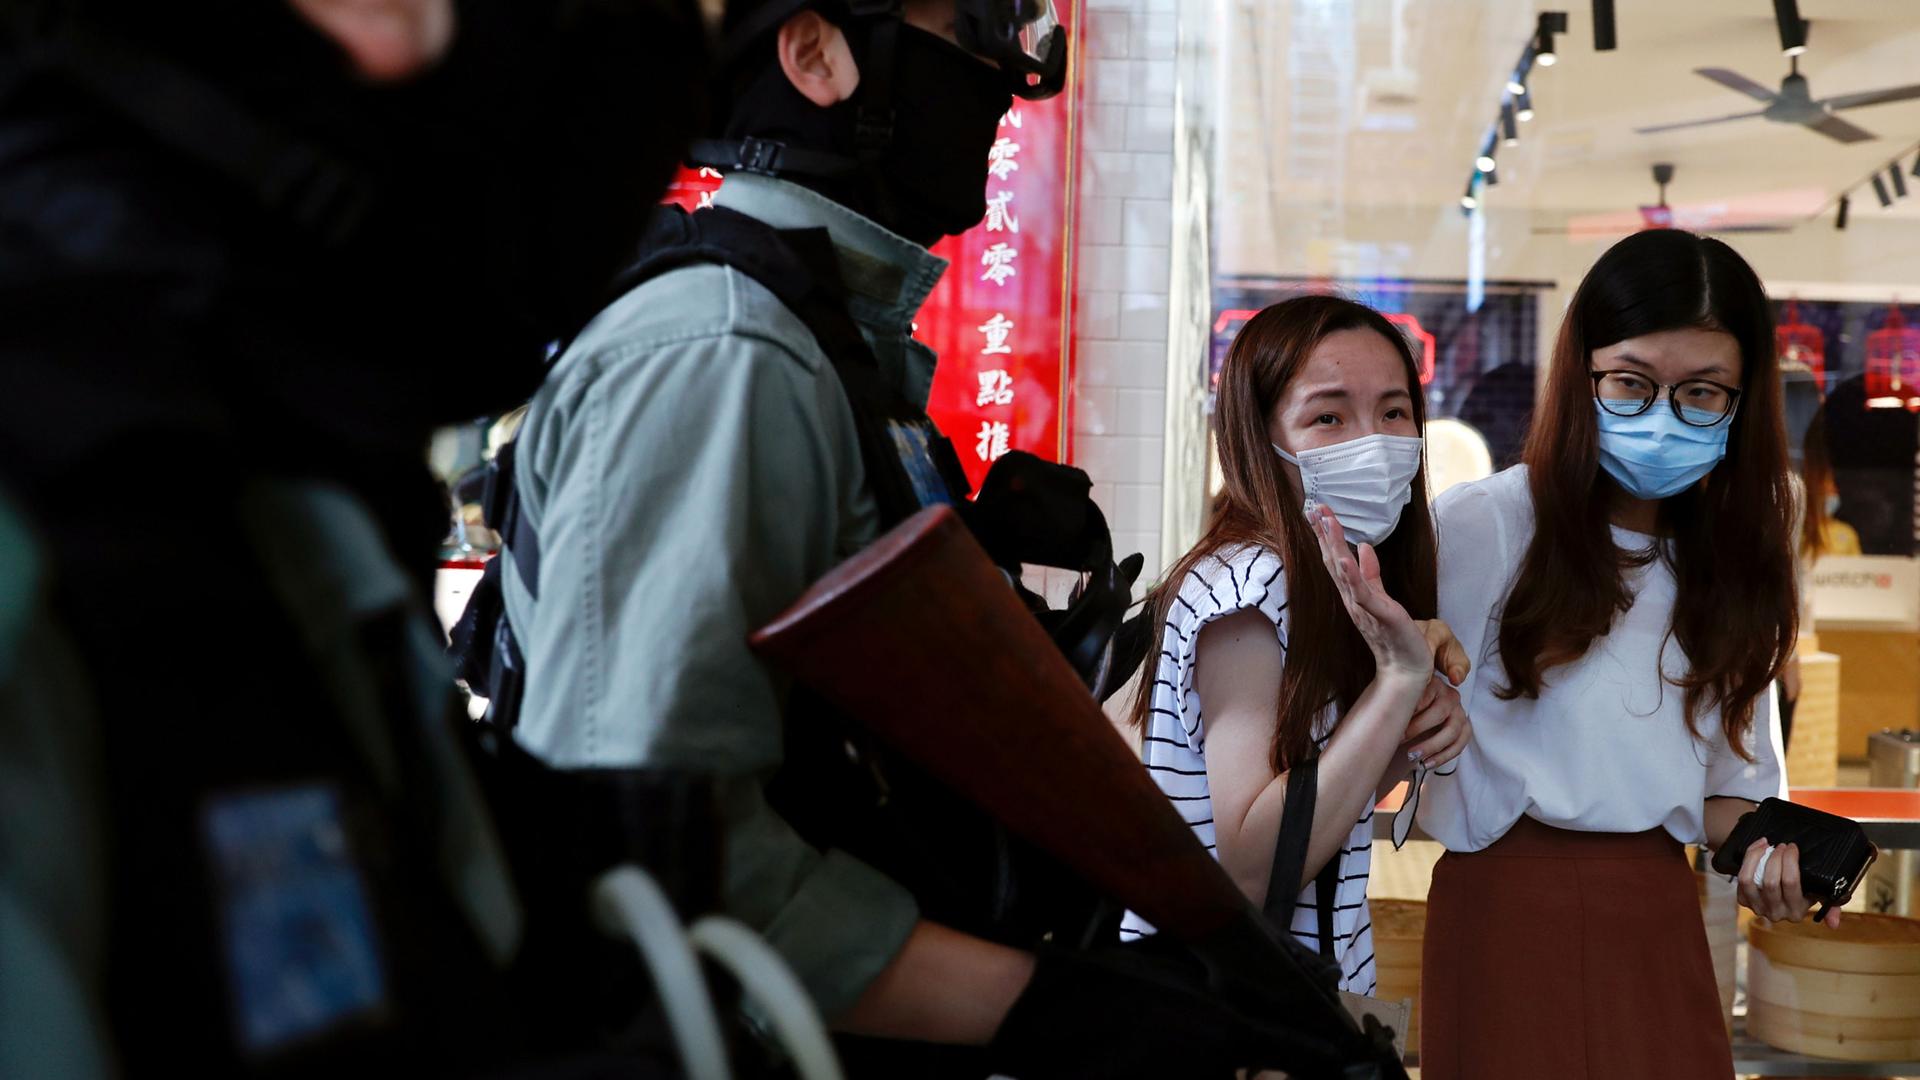 Two women are shown wearing protective face masks as several police officers walk past carrying weapons and wearing protective riot gear.